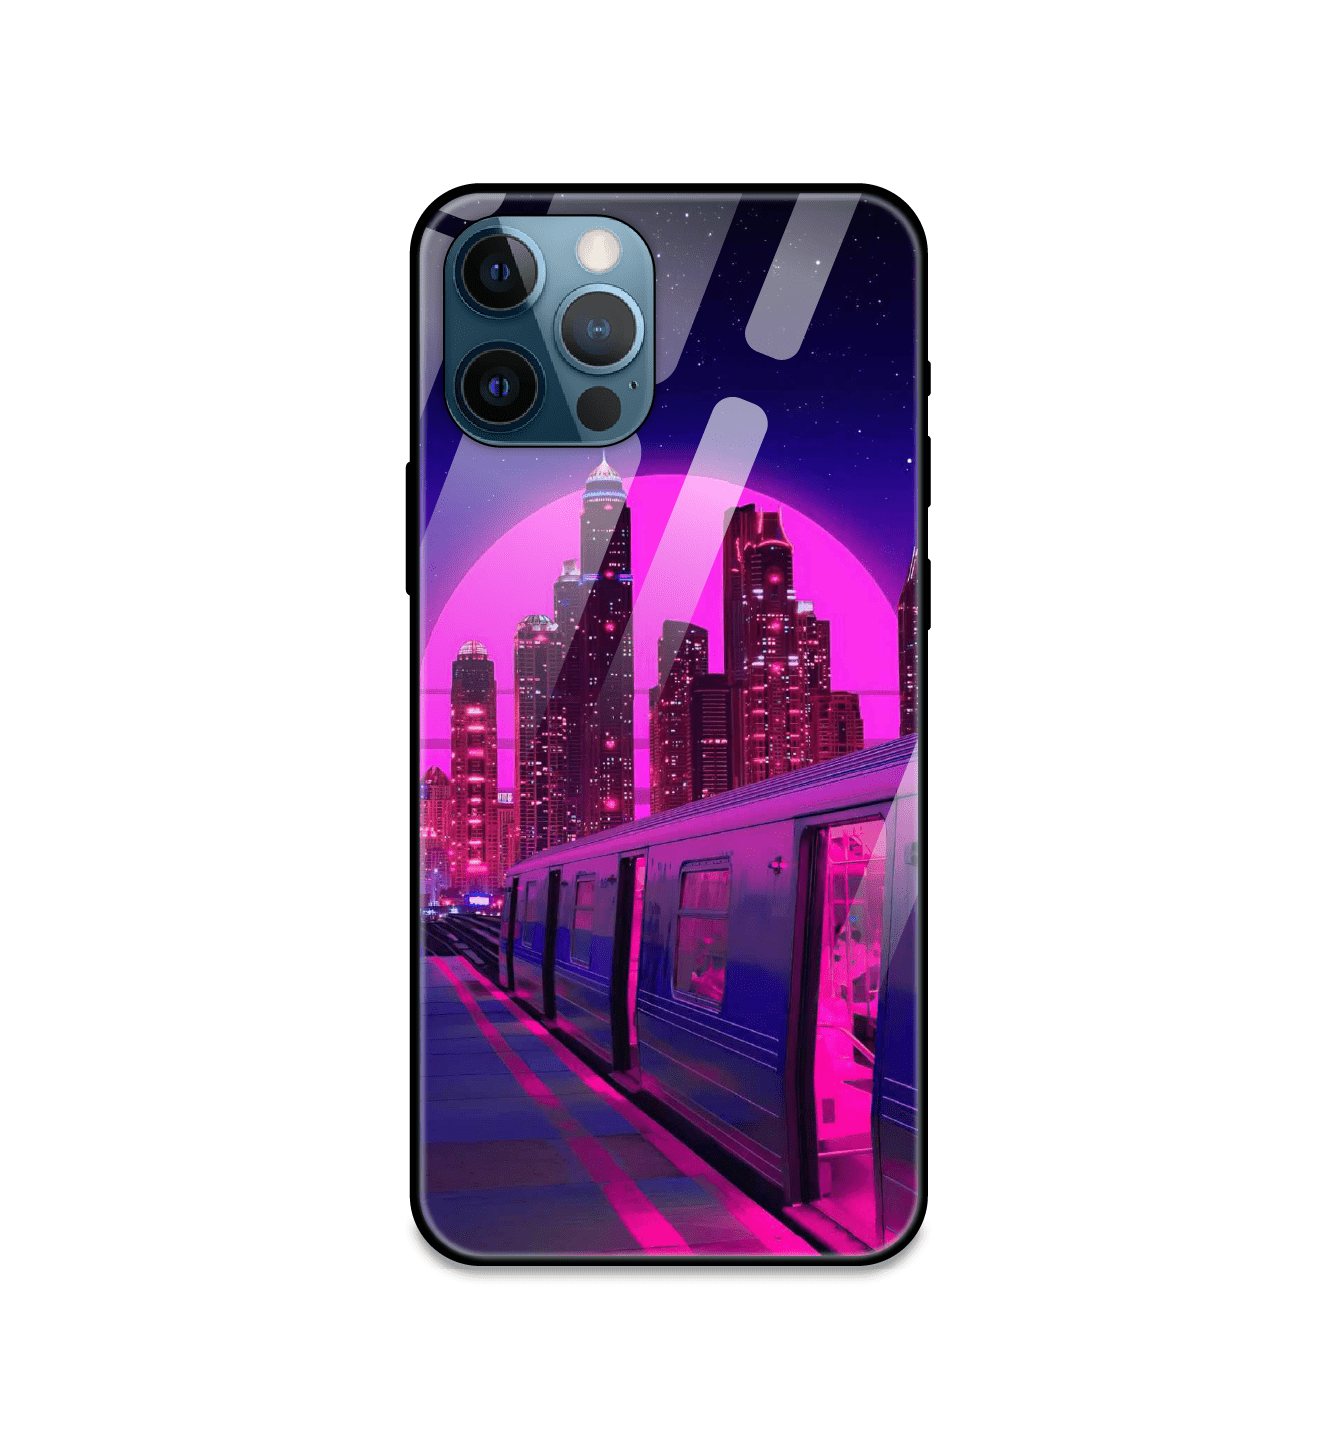 Neon City Synthwave - Glass Cases For iPhone Models